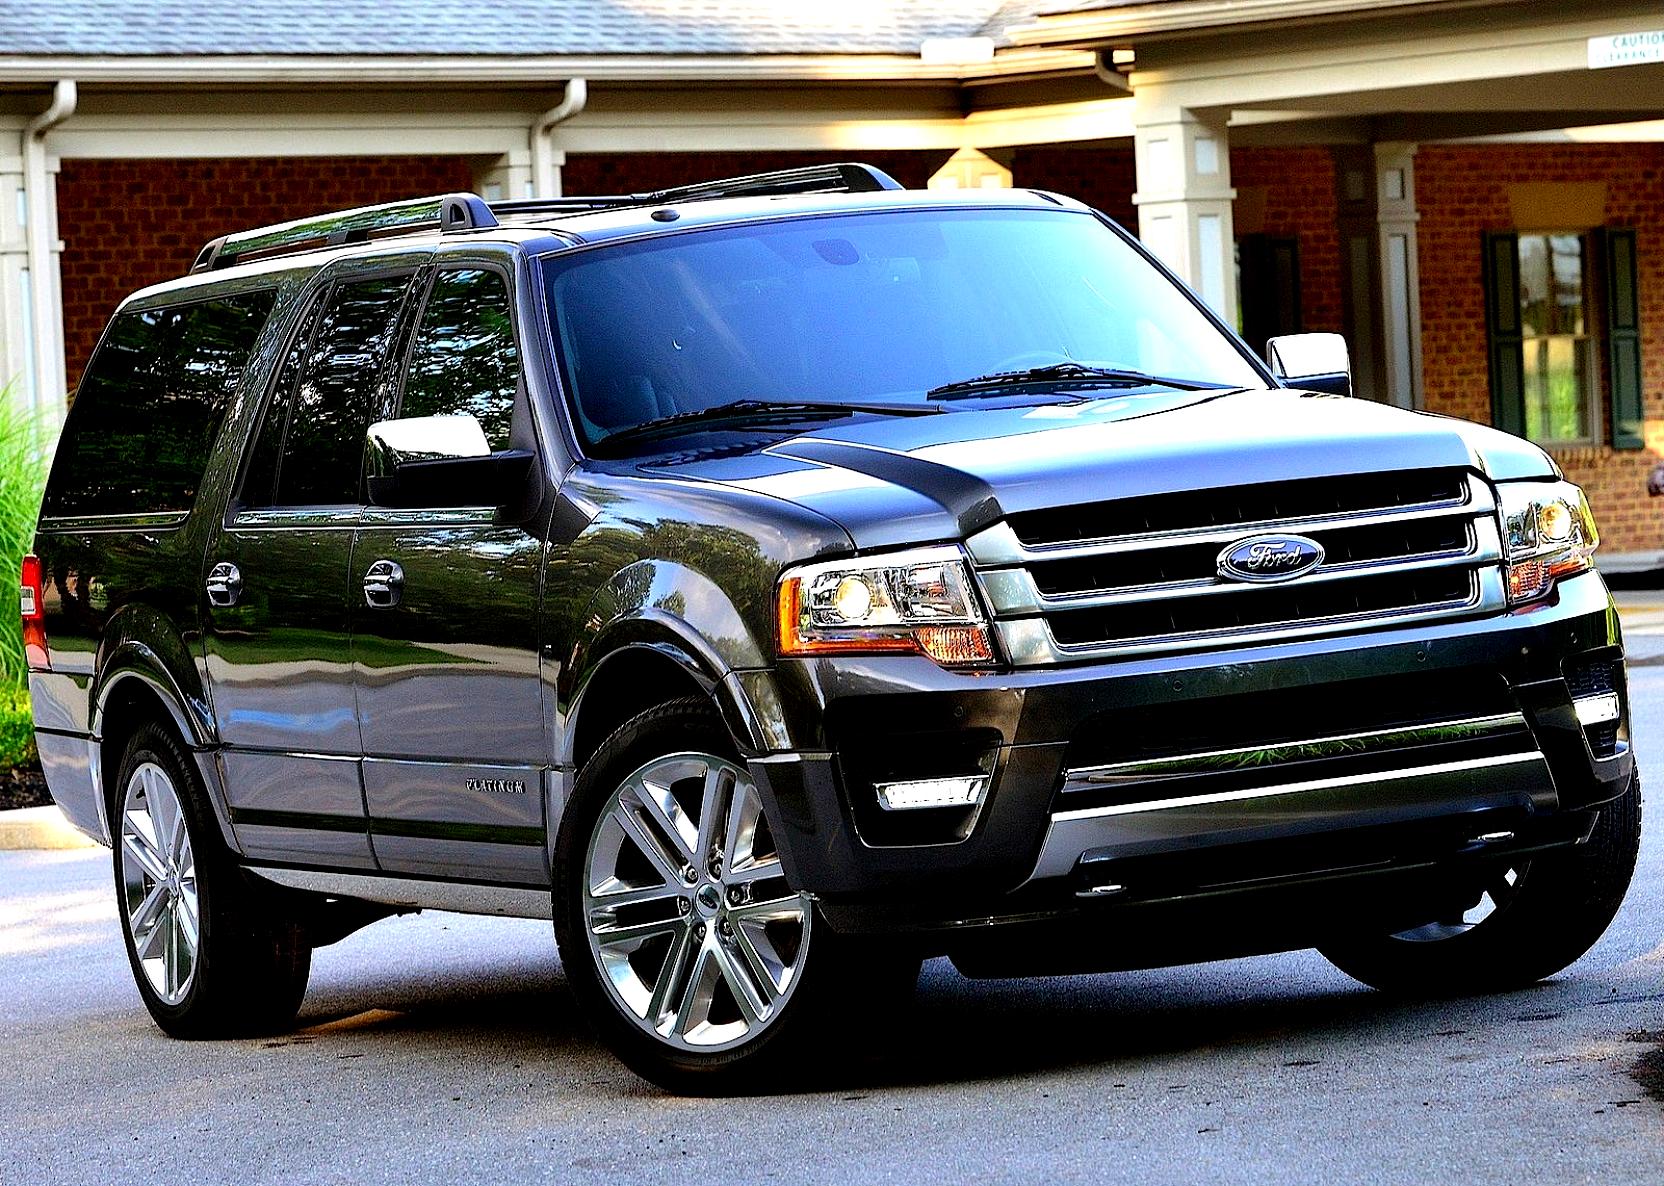 Ford Expedition 2014 #107